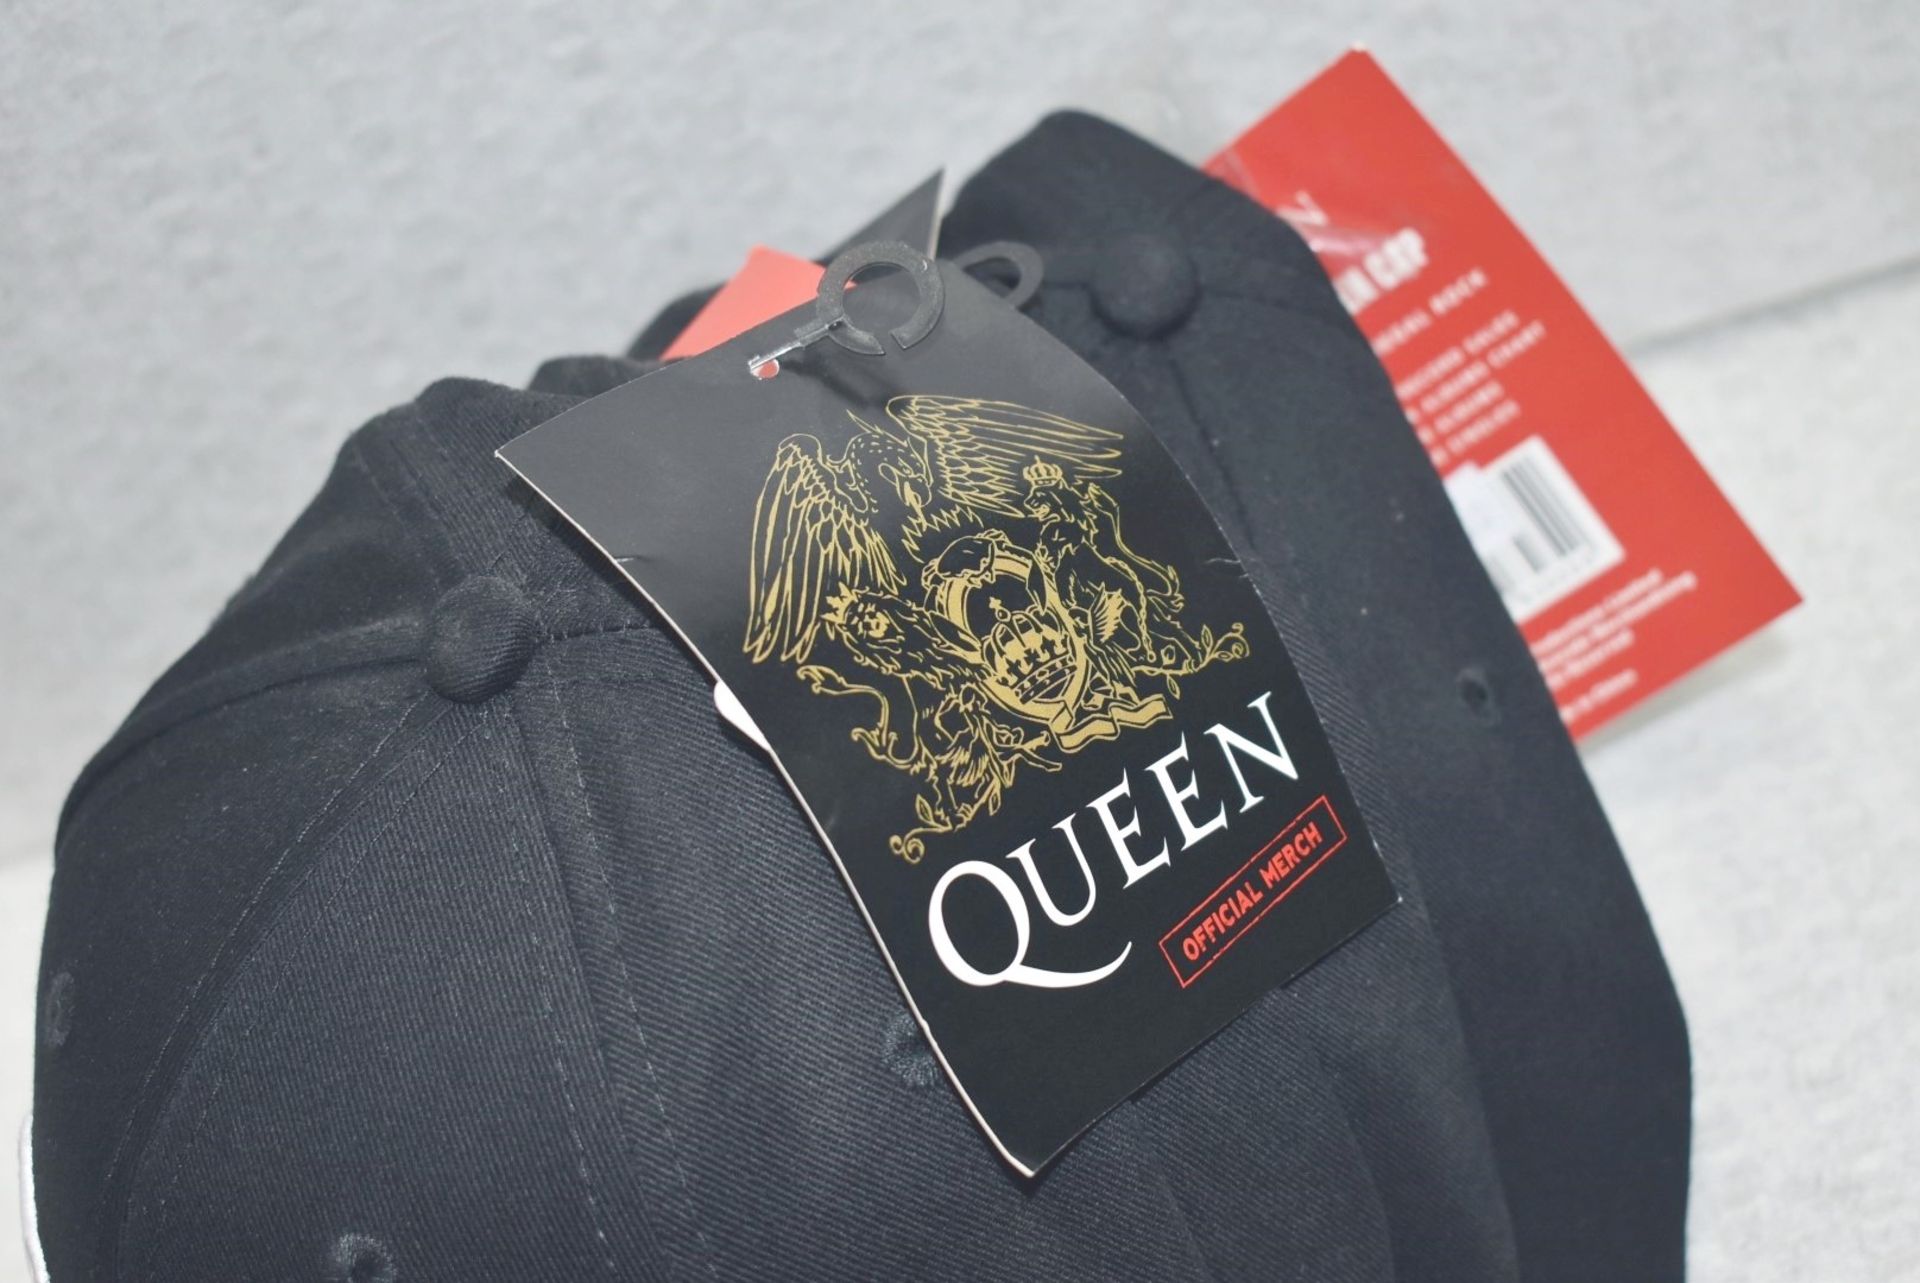 4 x Queen Baseball Caps - Colour: Black - One Size With Adjustable Strap - Officially Licensed - Image 6 of 7